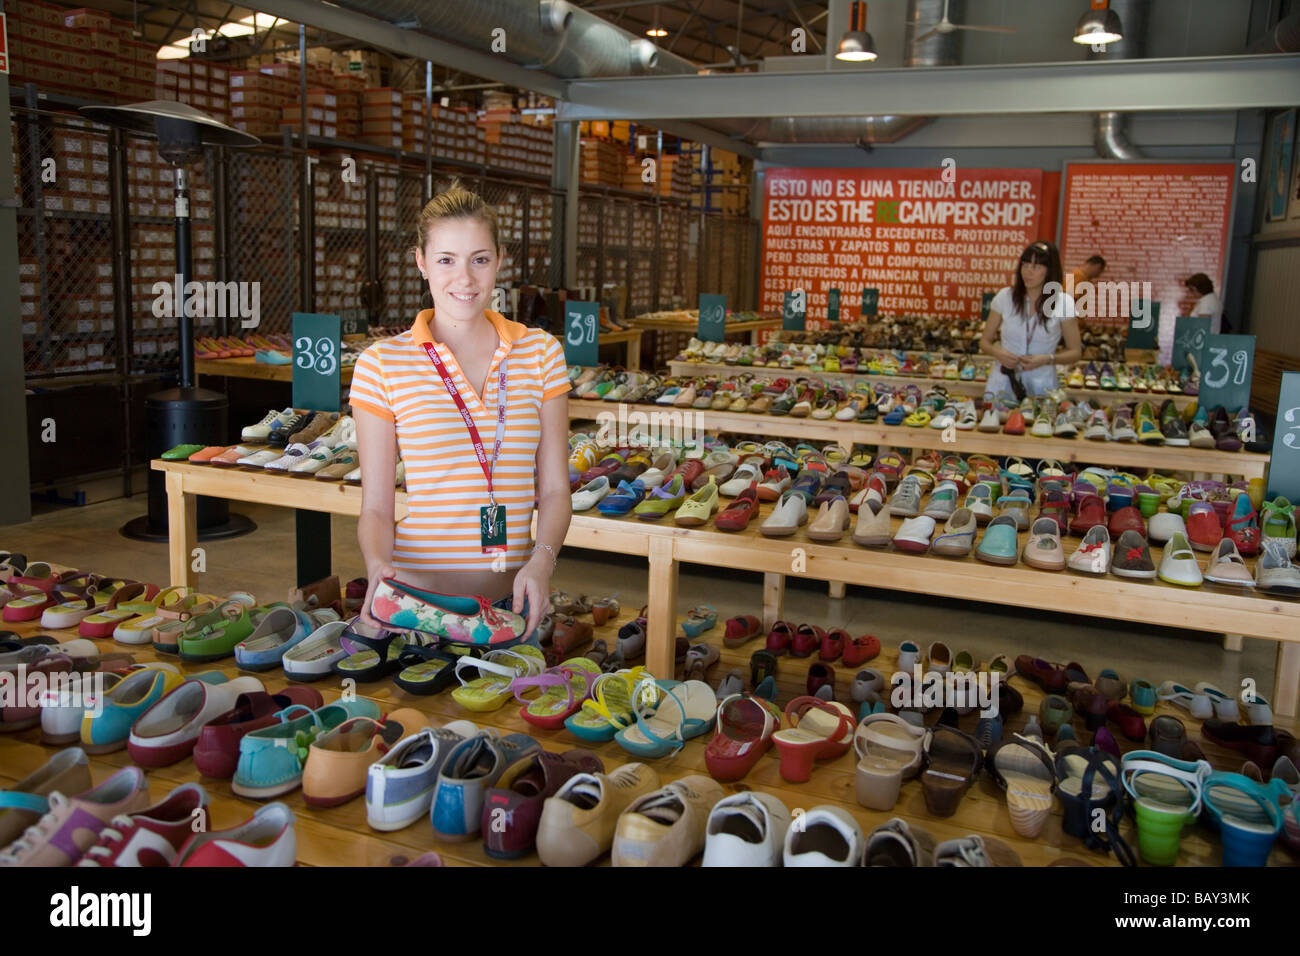 Camper Shoes Outlet Store, Inca, Mallorca, Balearic Islands, Spain Stock  Photo - Alamy